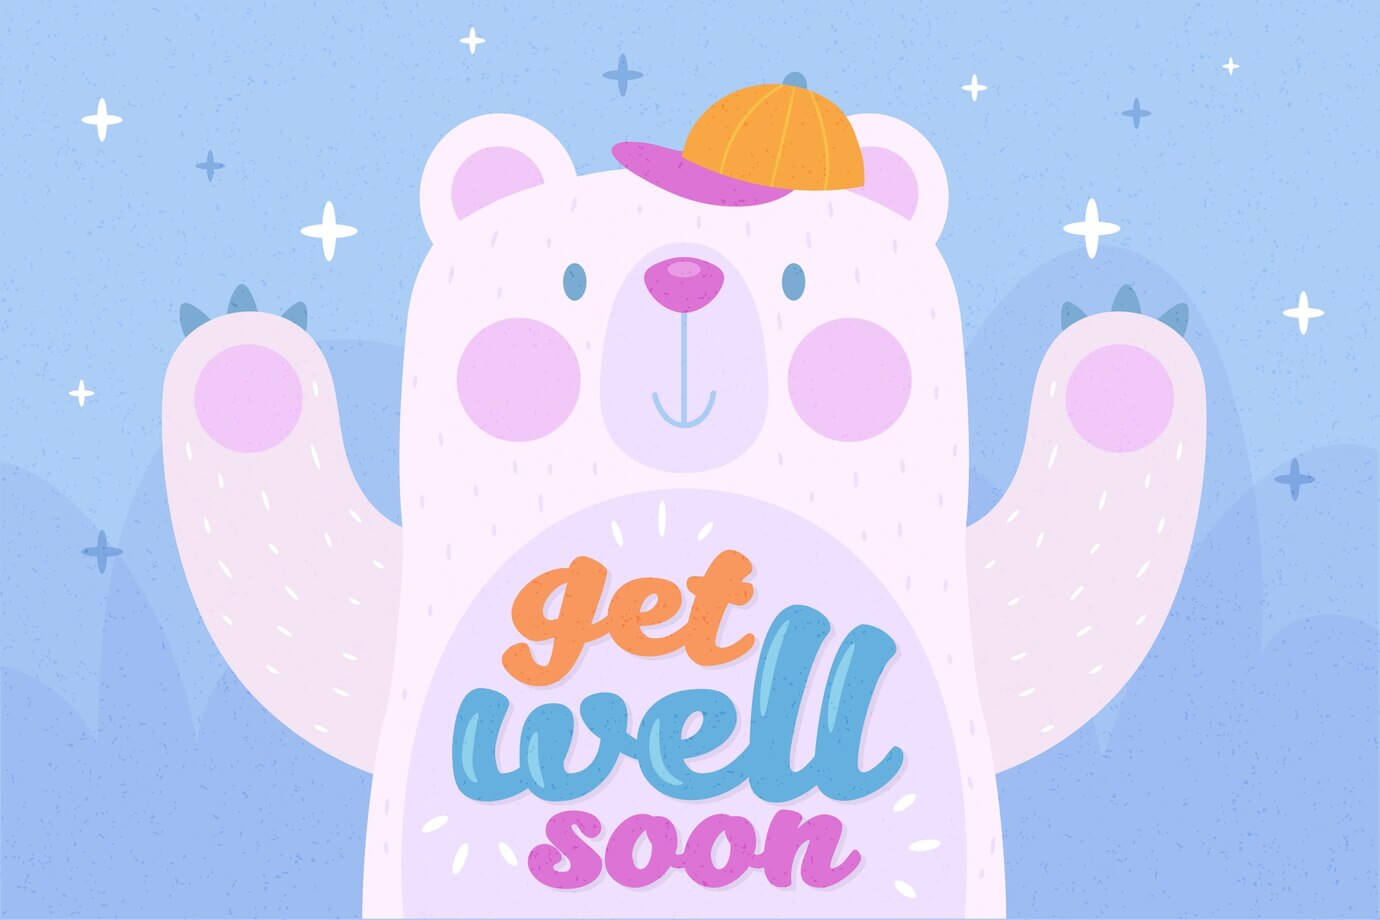 Best Hope You Feel Better Soon Messages, Wishes and Quotes